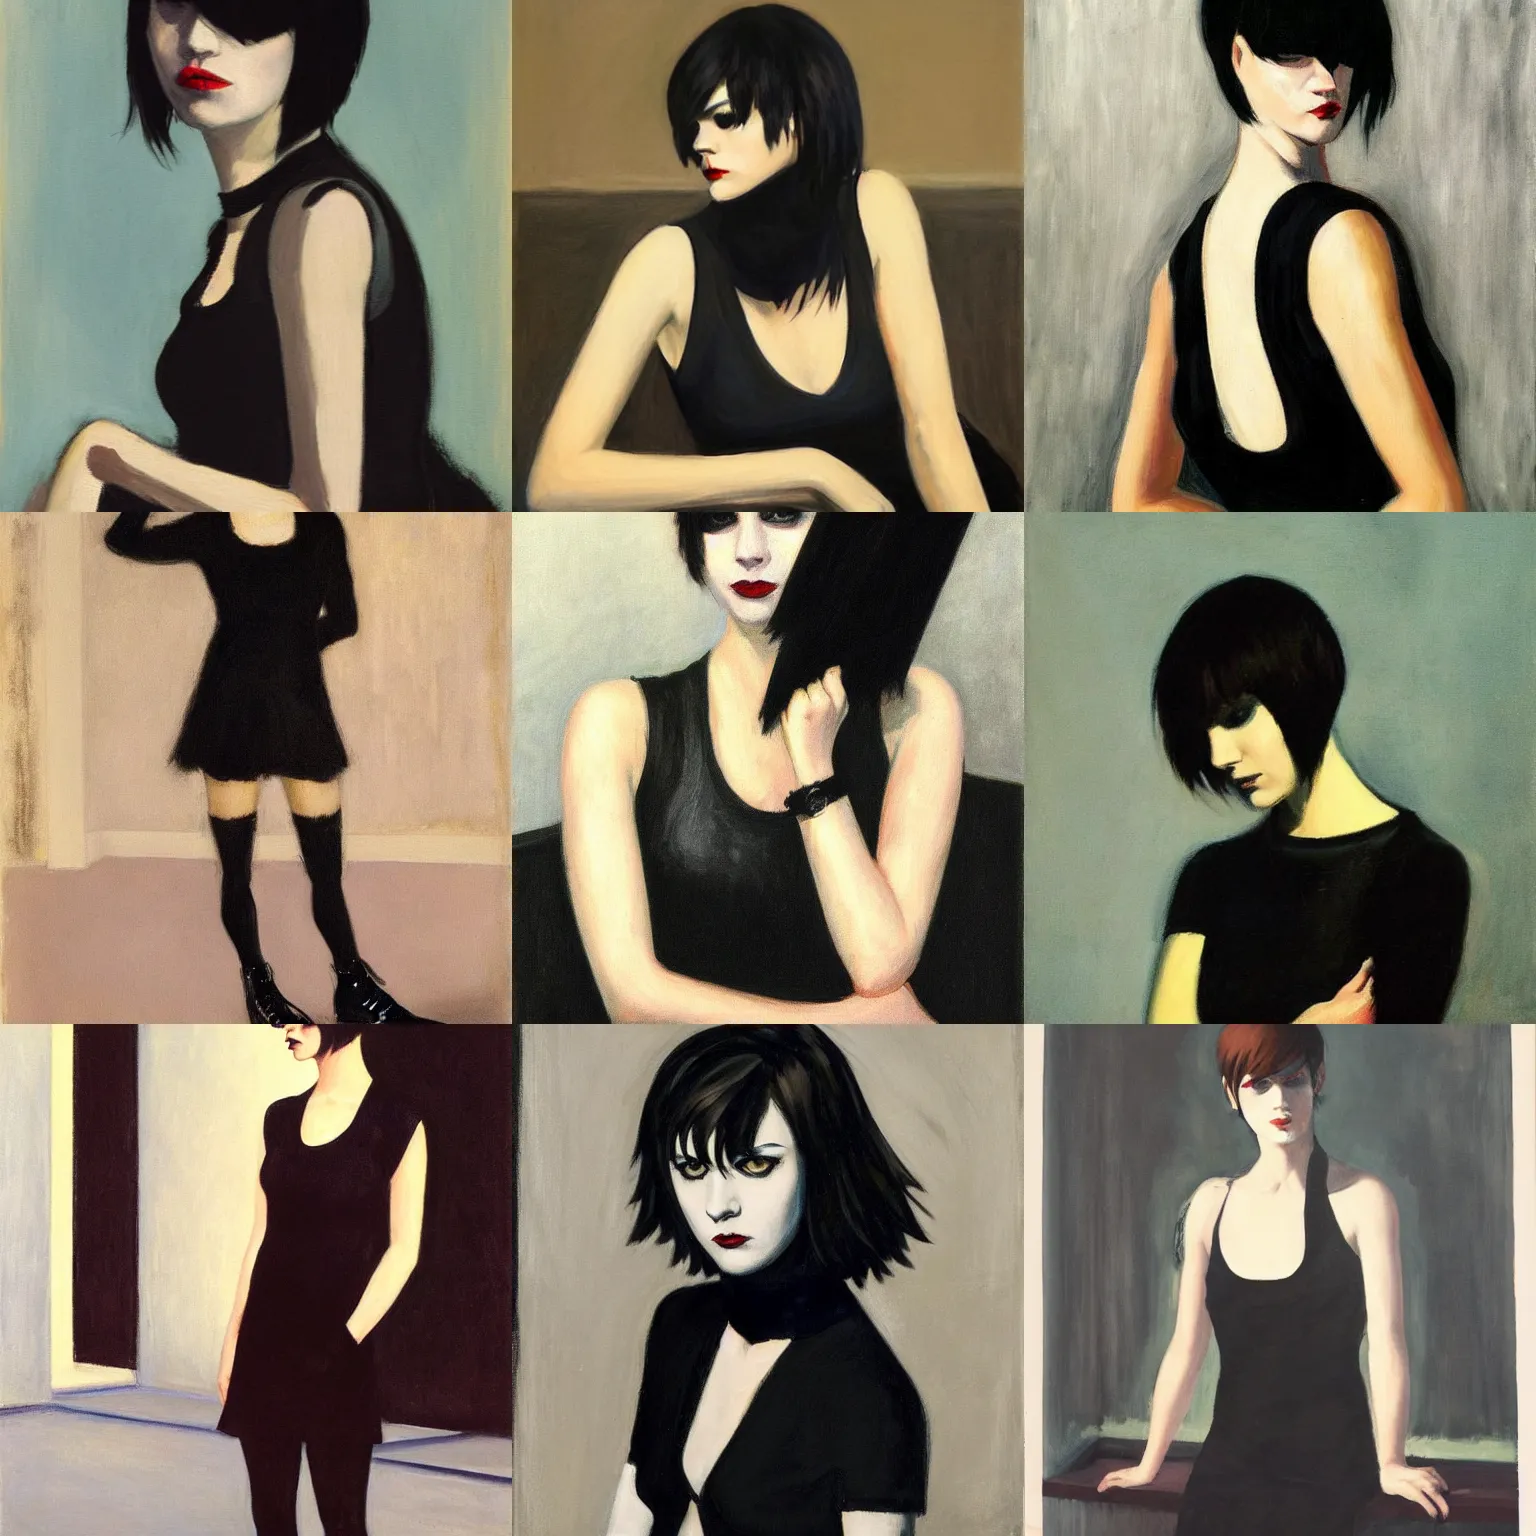 Prompt: an emo portrait by edward hopper. her hair is dark brown and cut into a short, messy pixie cut. she has large entirely - black evil eyes. she is wearing a black tank top, a black leather jacket, a black knee - length skirt, a black choker, and black leather boots.